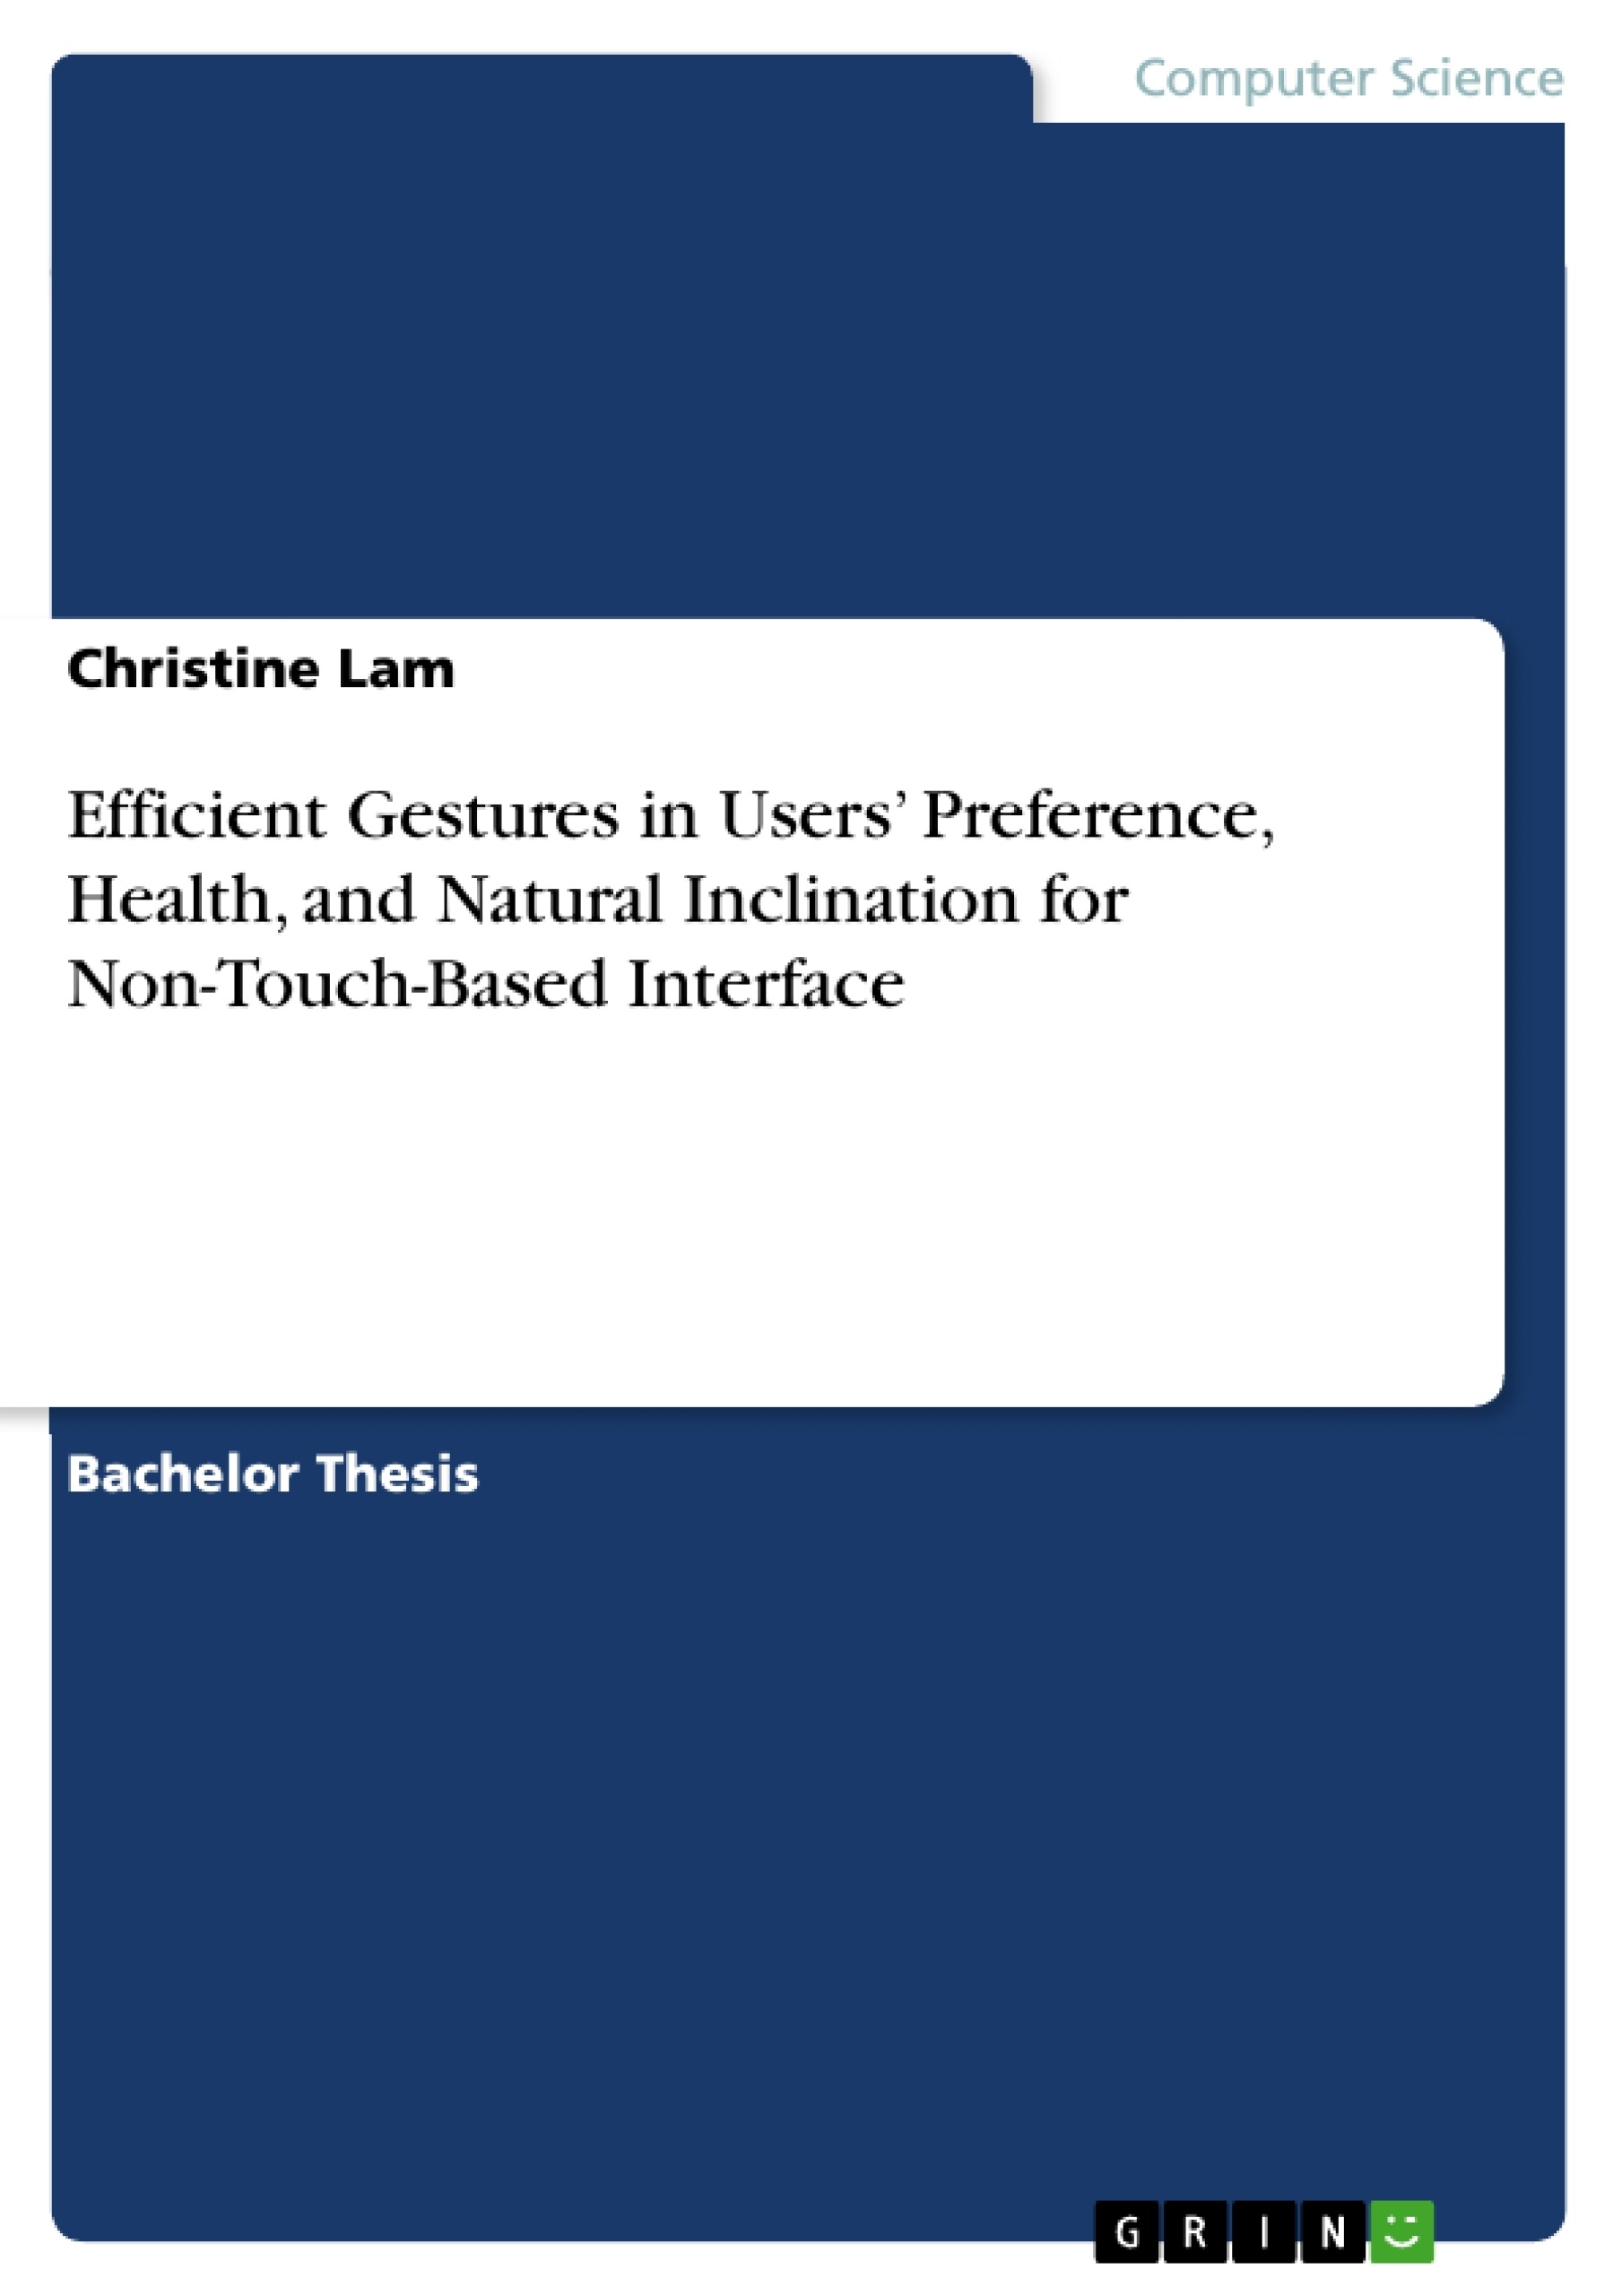 Title: Efficient Gestures in Users’ Preference, Health, and Natural Inclination for Non-Touch-Based Interface